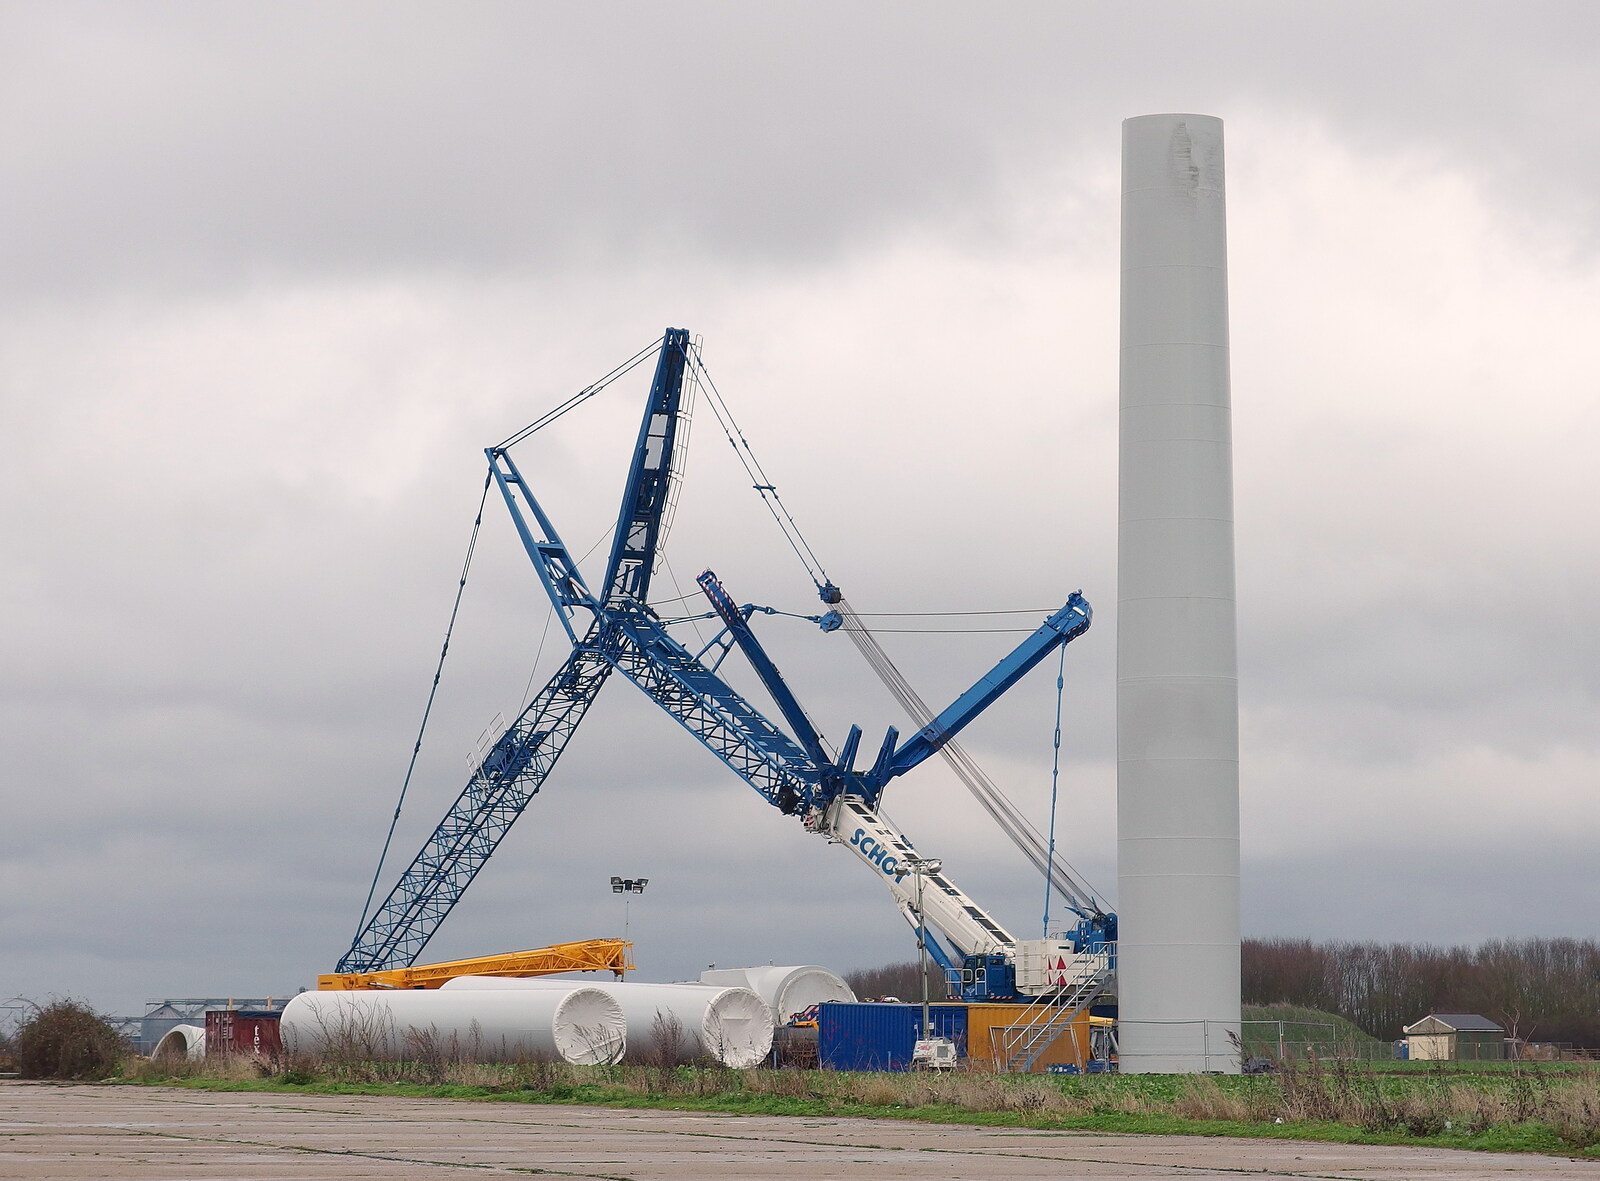 On Eye Airfield, a third wind turbine is constructed from The BBs Do New Year's Eve at the Barrel, Banham, Norfolk - 31st December 2013